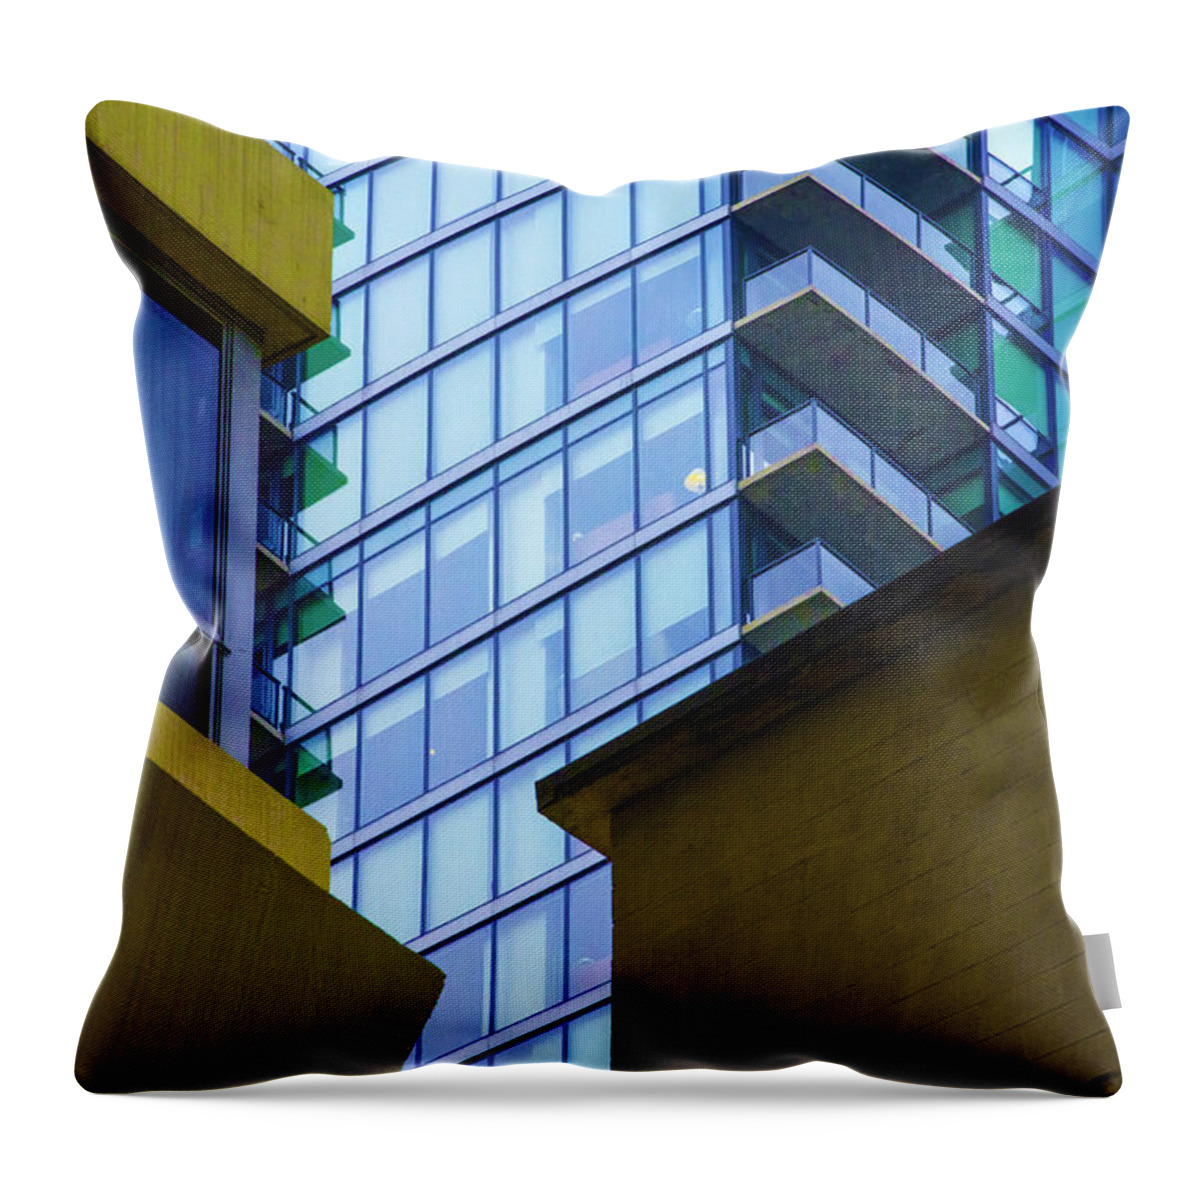  Throw Pillow featuring the photograph Building Abstract No.1 by Raymond Kunst